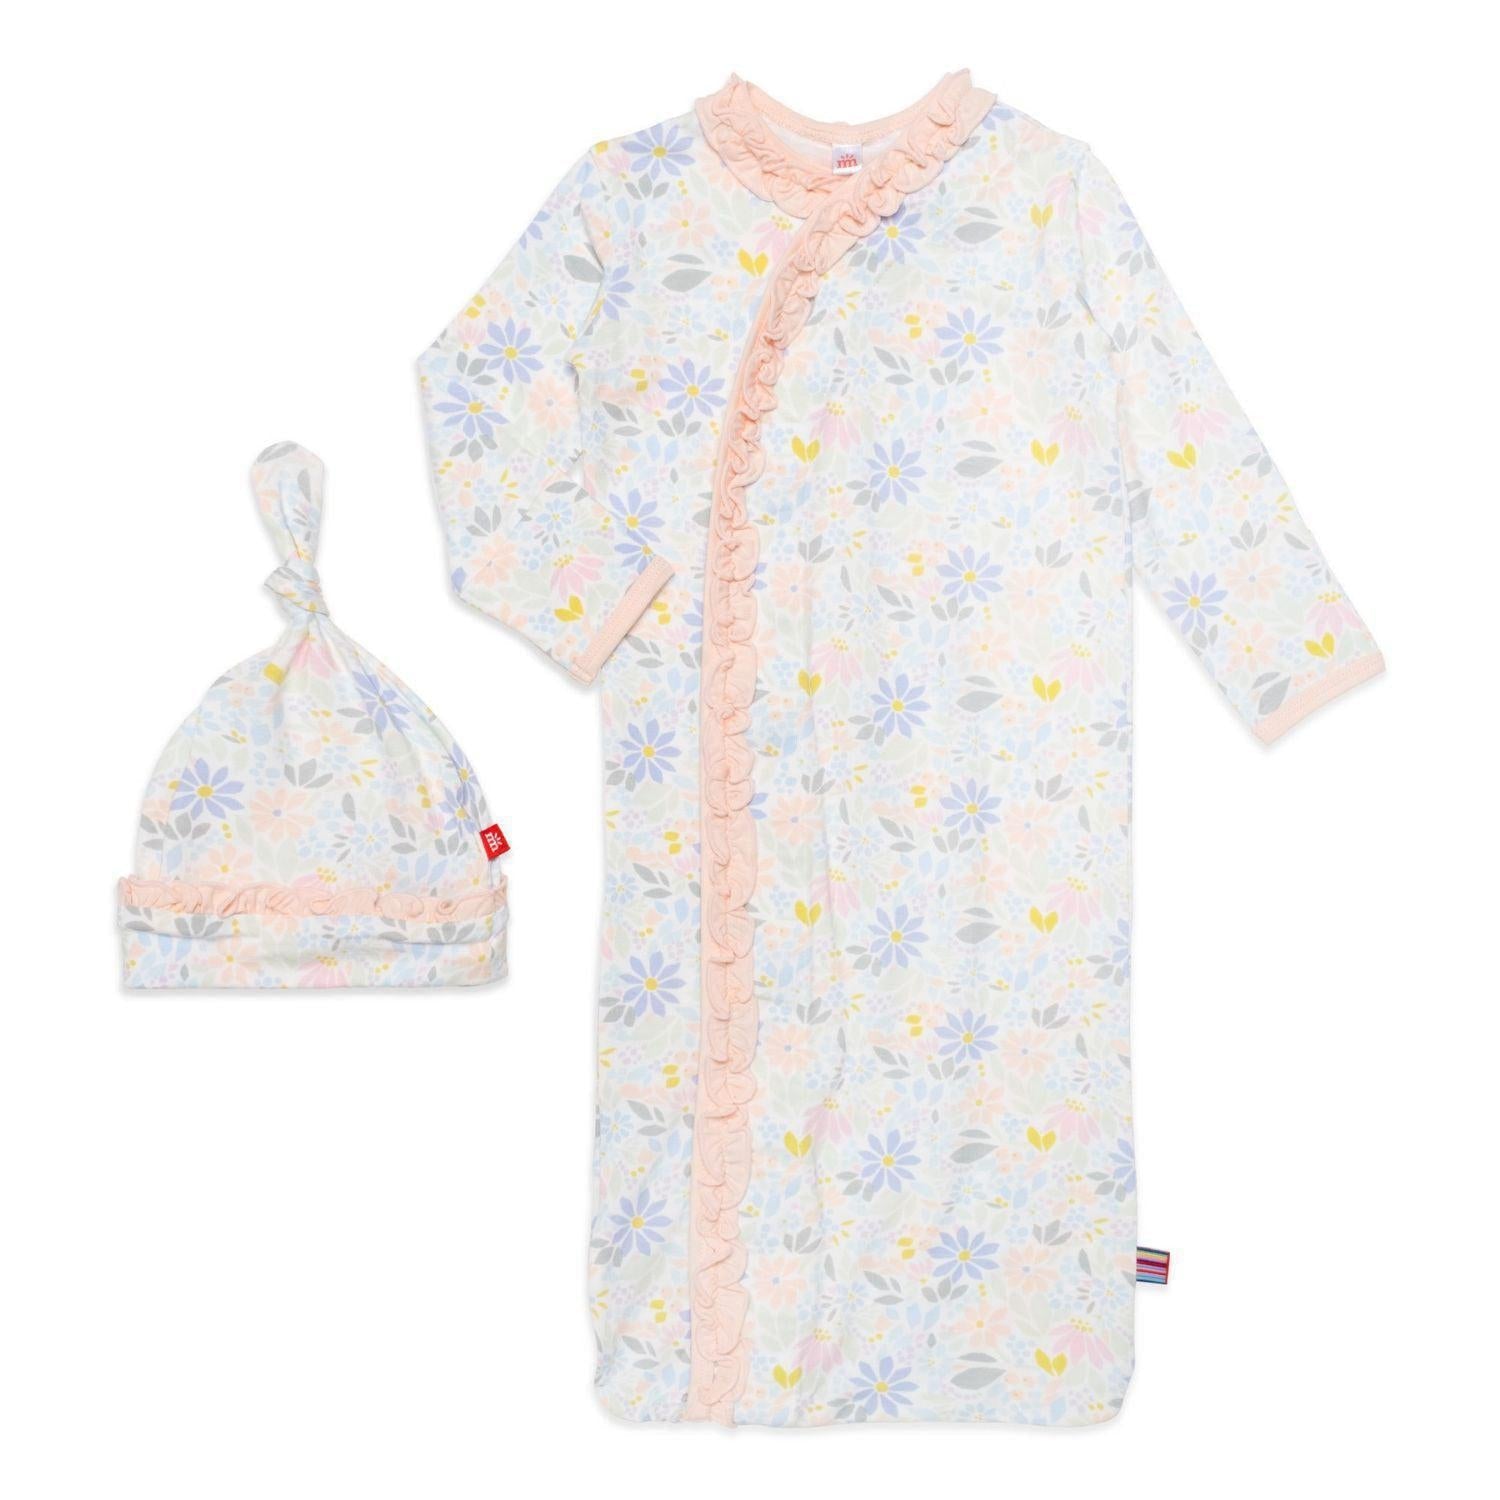 Darby Modal Magnetic Sleeper Gown + Hat Set